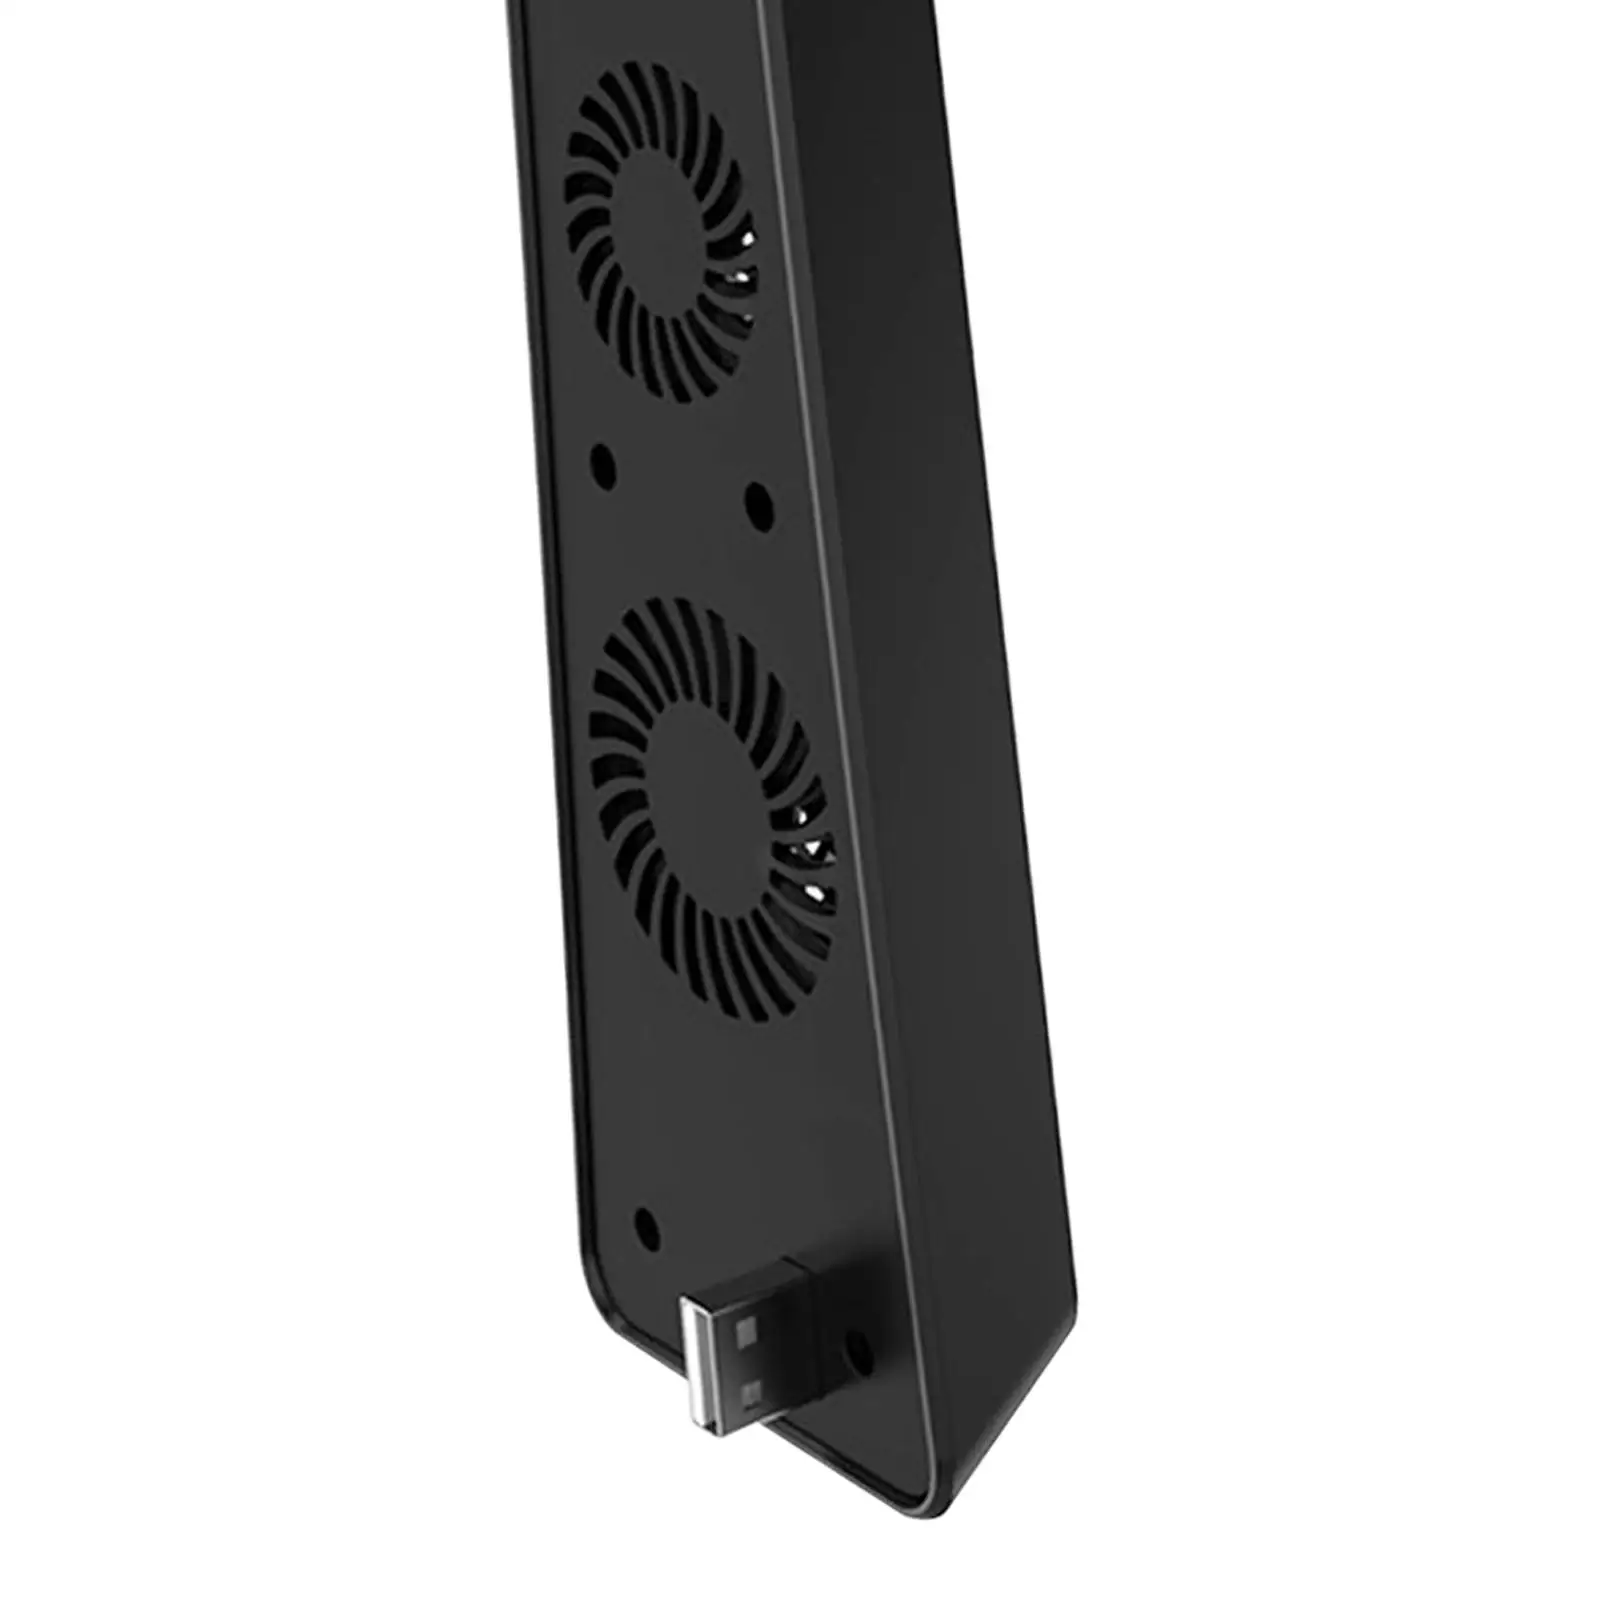 Upgraded Cooling Fan with LED Light with USB Port Horizontal Self Starting Quiet Silent Operation Cooler for Consoles